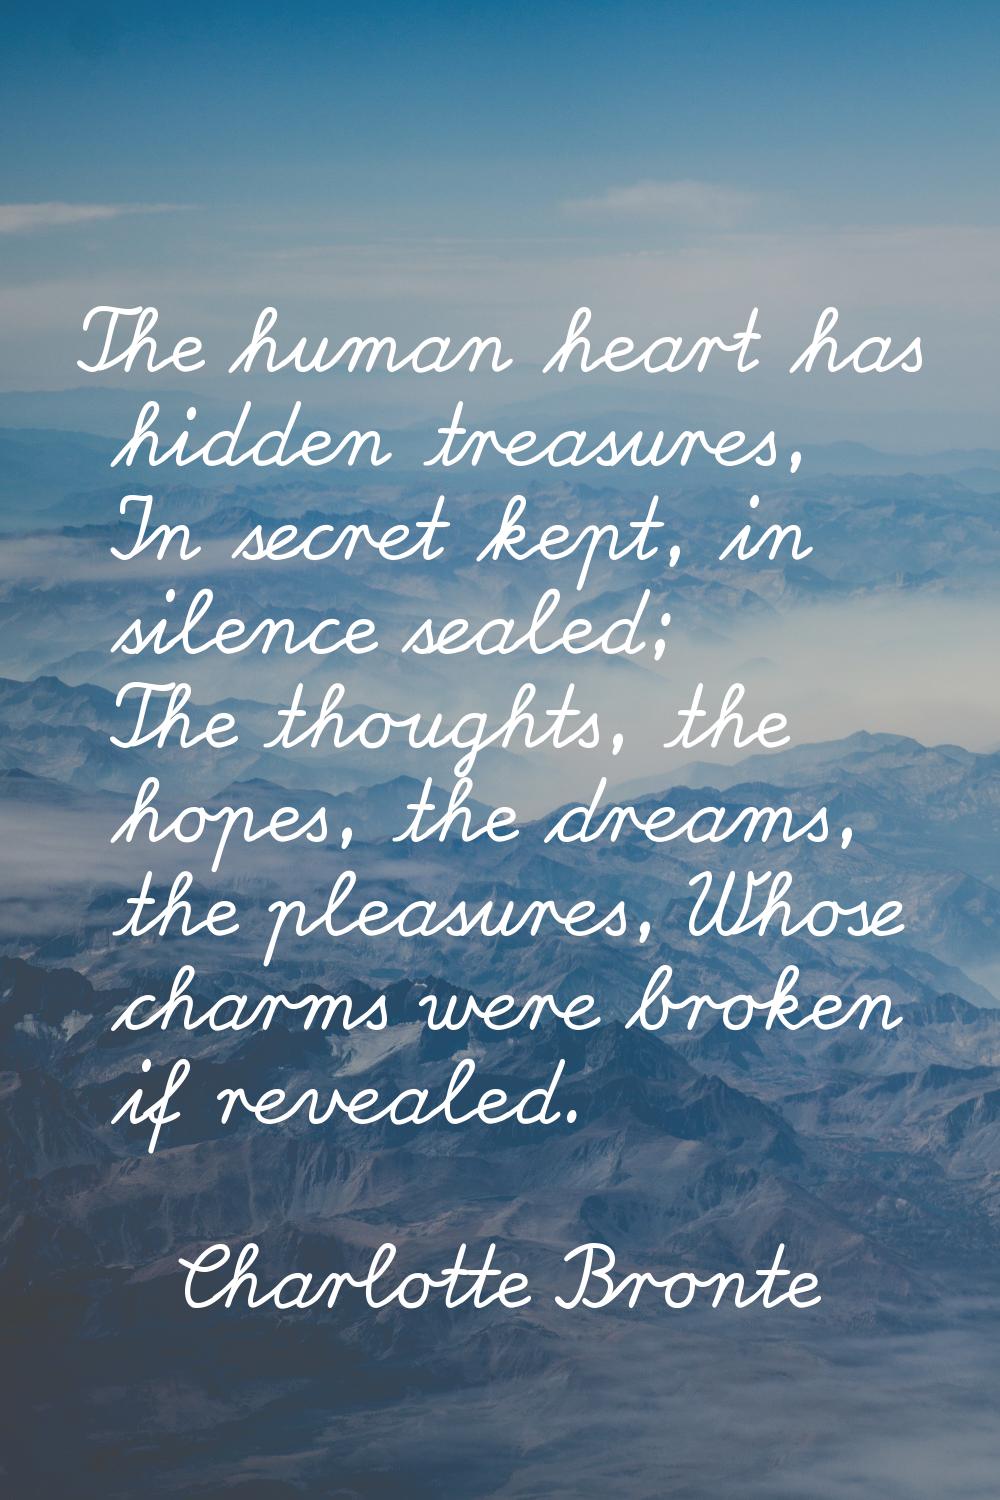 The human heart has hidden treasures, In secret kept, in silence sealed; The thoughts, the hopes, t